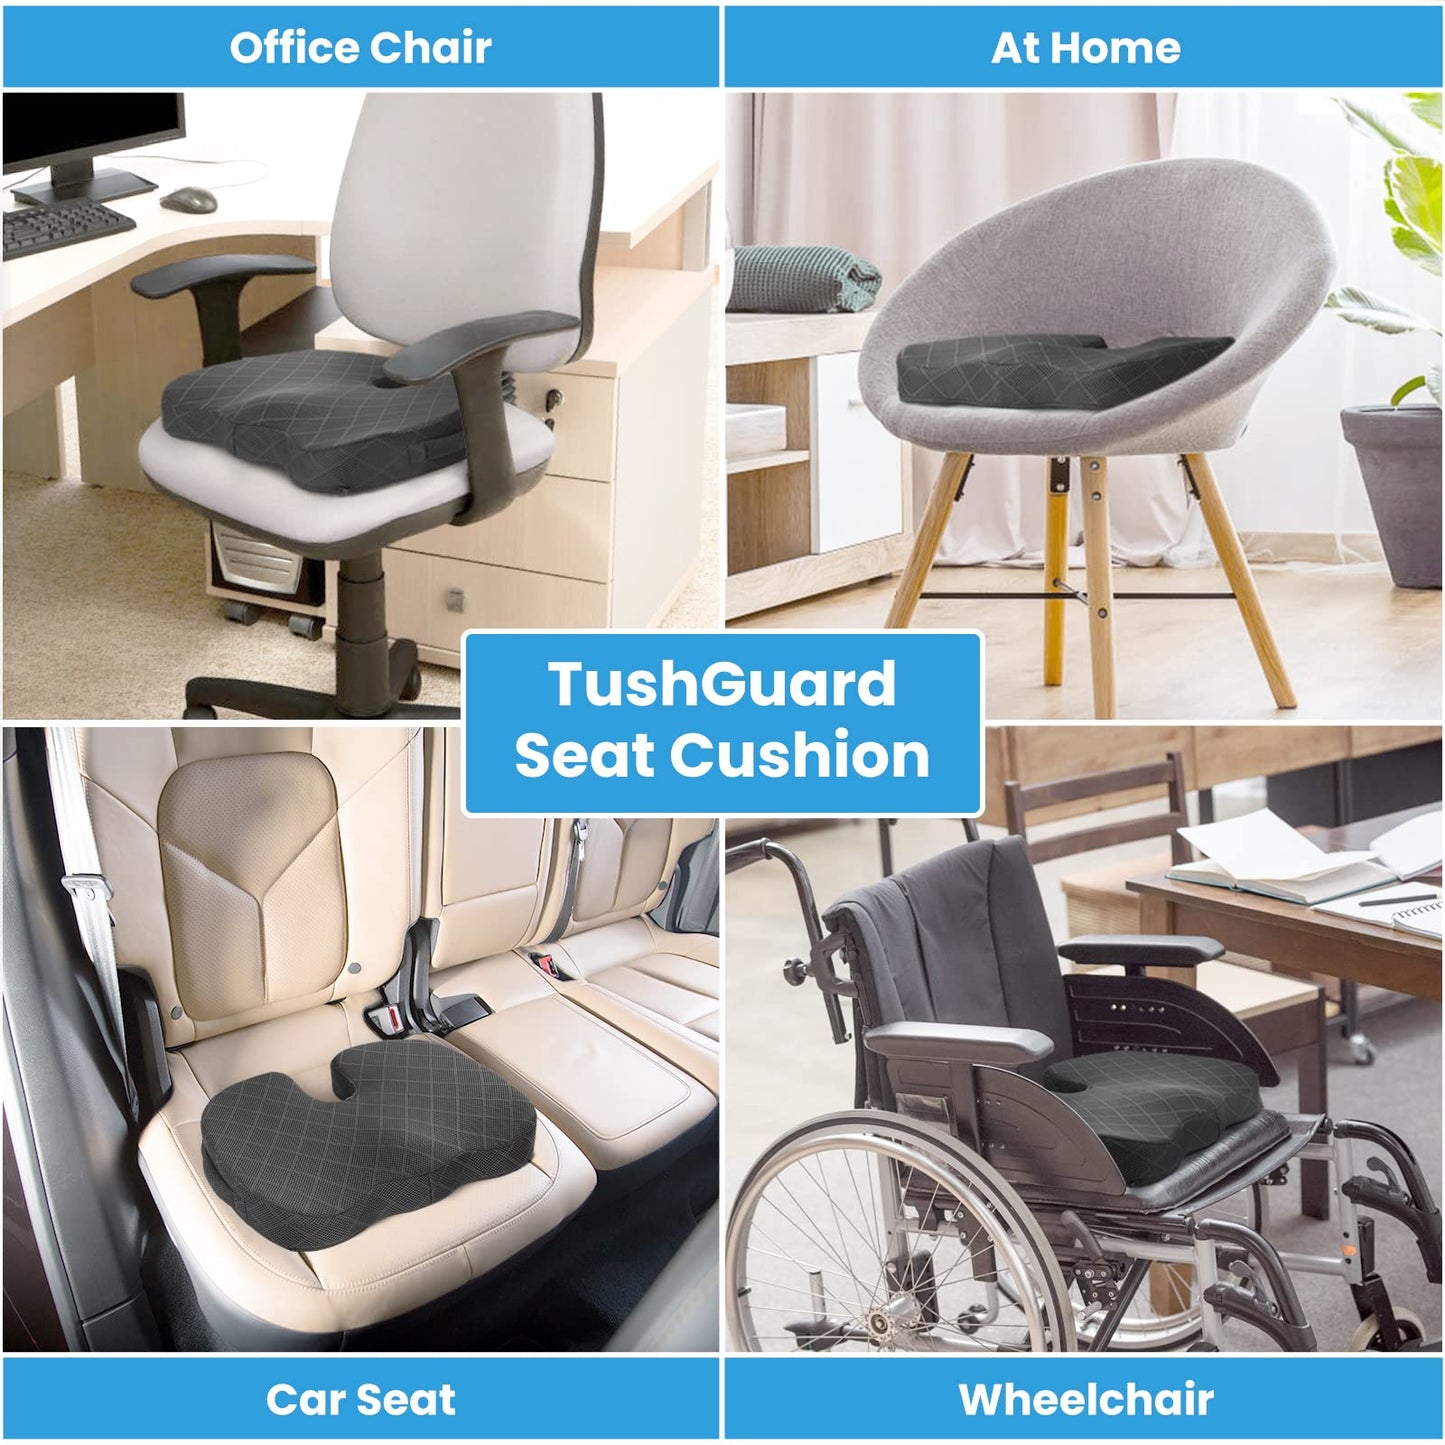 TushGuard Seat Cushion - Memory Foam Cushion for Office Chair, Car Seat, Airplane, Bleacher - Sciatica & Hip & Coccyx Pain Relief Desk Chair Cushion for Long Sitting Office Workers, Car Drivers